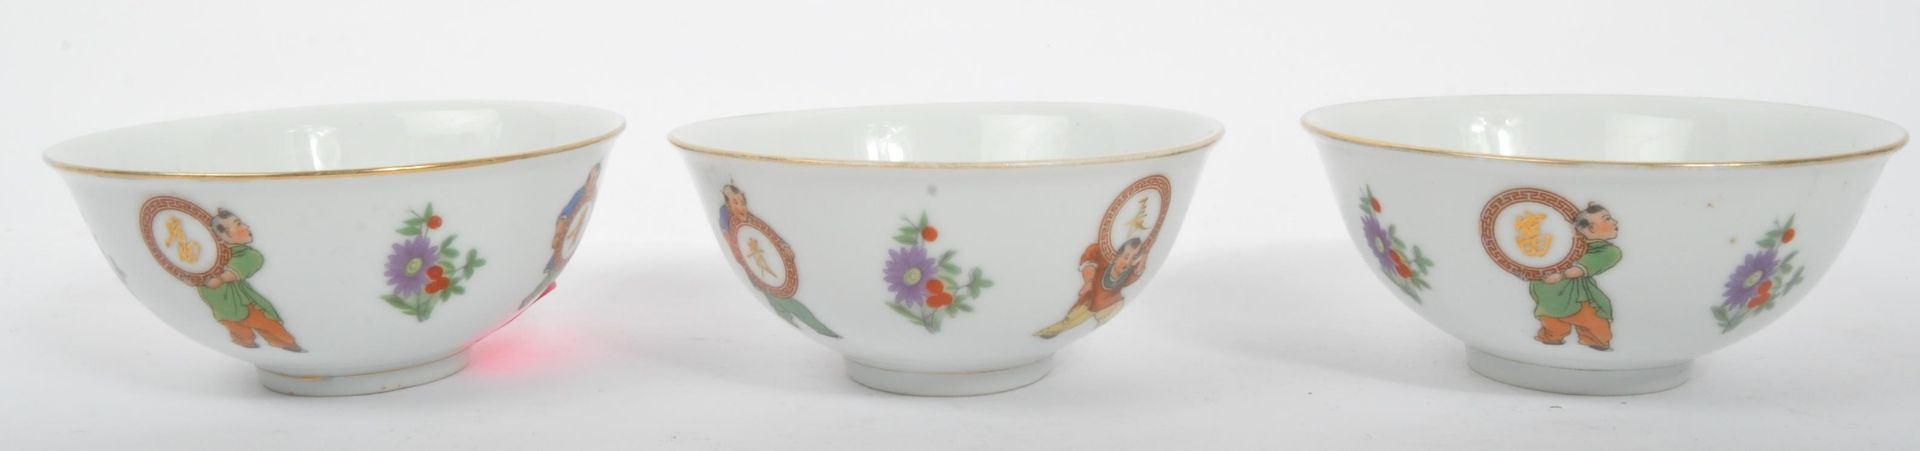 COLLECTION OF VINTAGE 20TH CENTURY CHINESE BOWLS